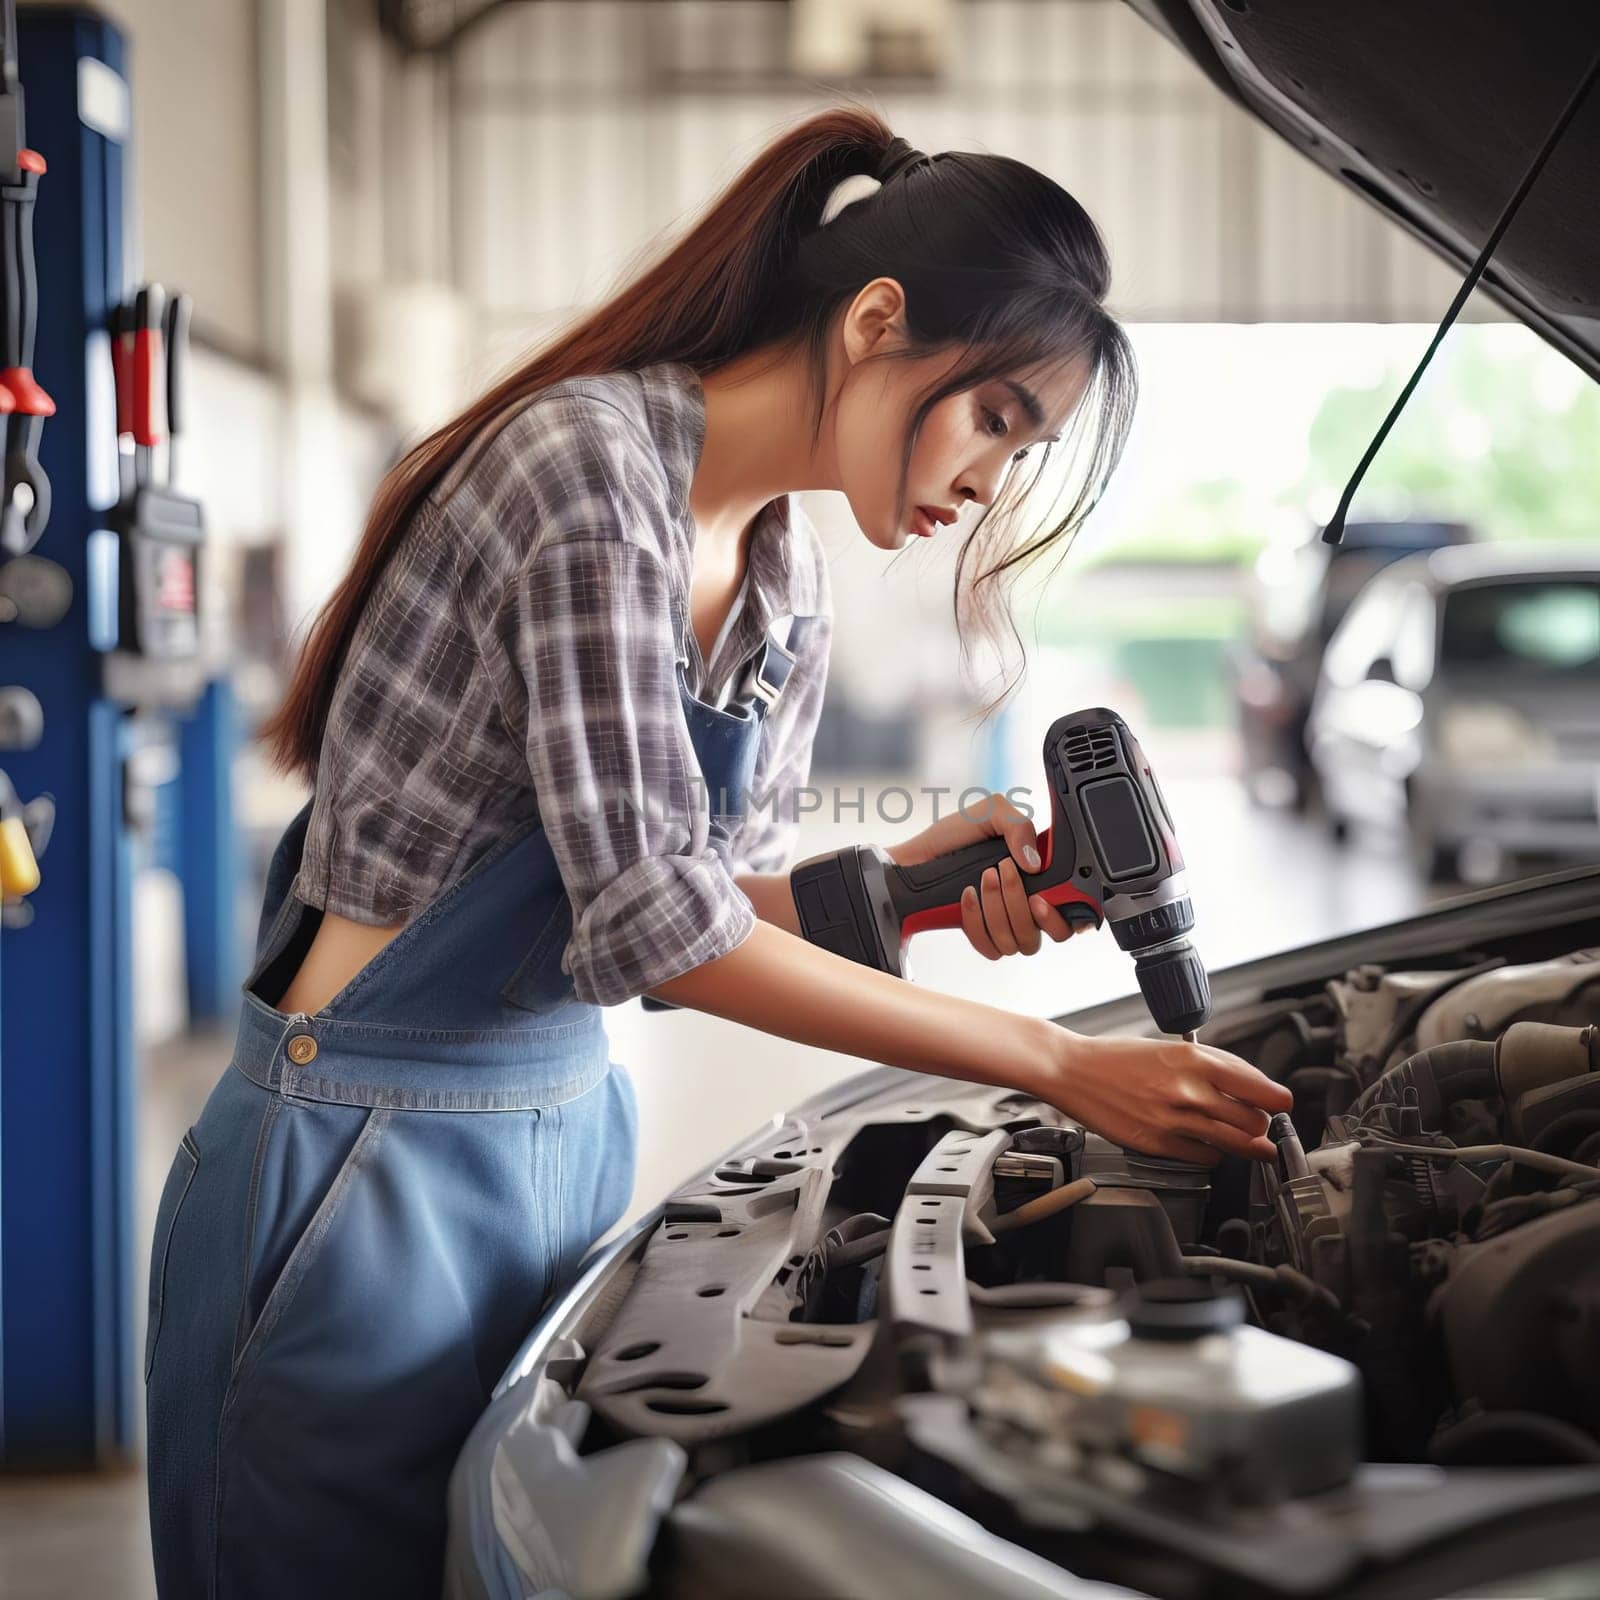 Pretty asian woman in a plaid shirt and jeans overalls is working on a car engine in a garage, using a power tool. by sfinks